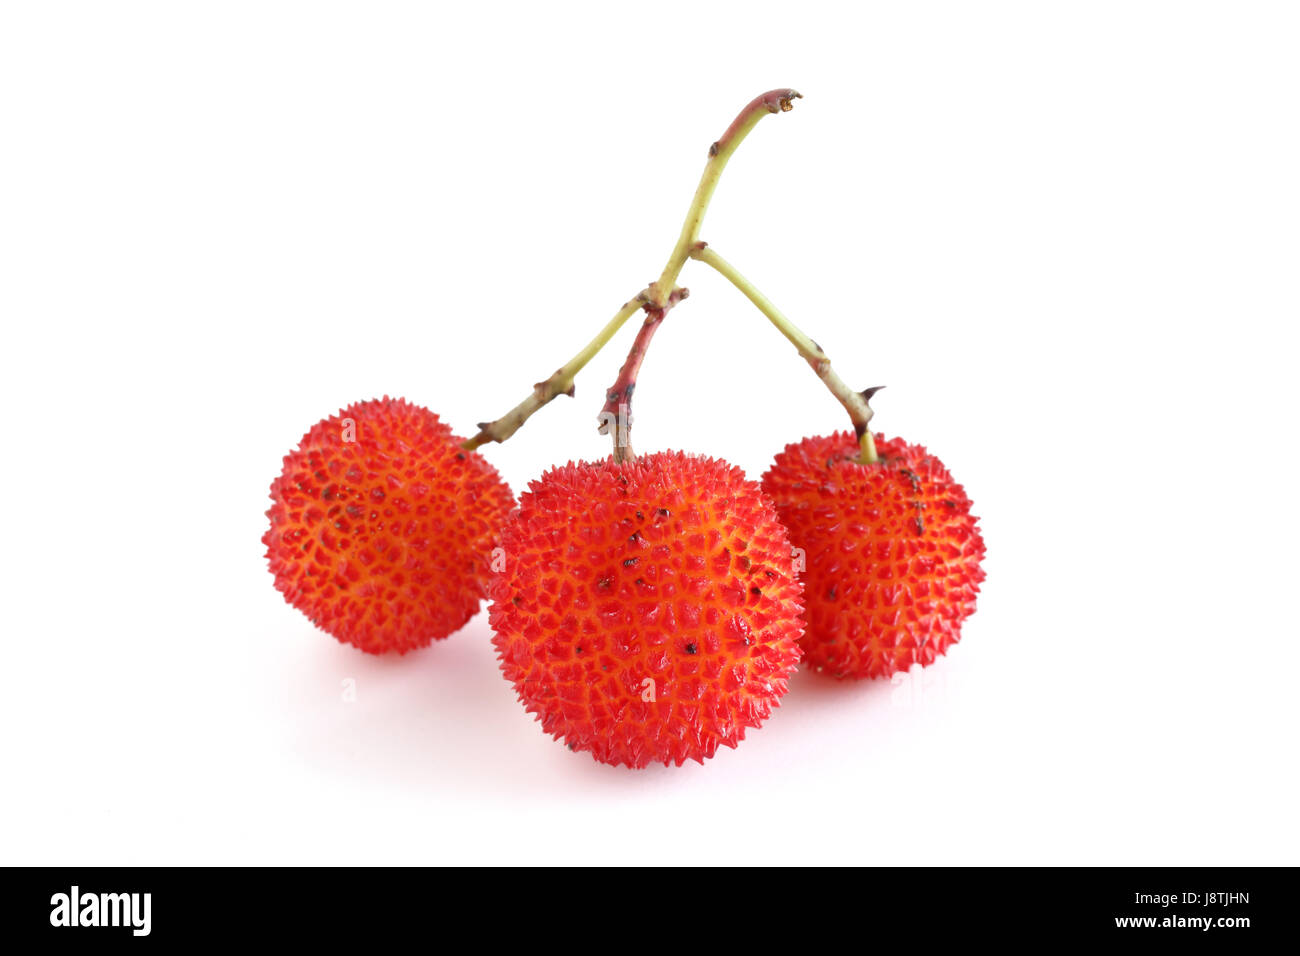 Red Bayberry High Resolution Stock Photography and Images - Alamy